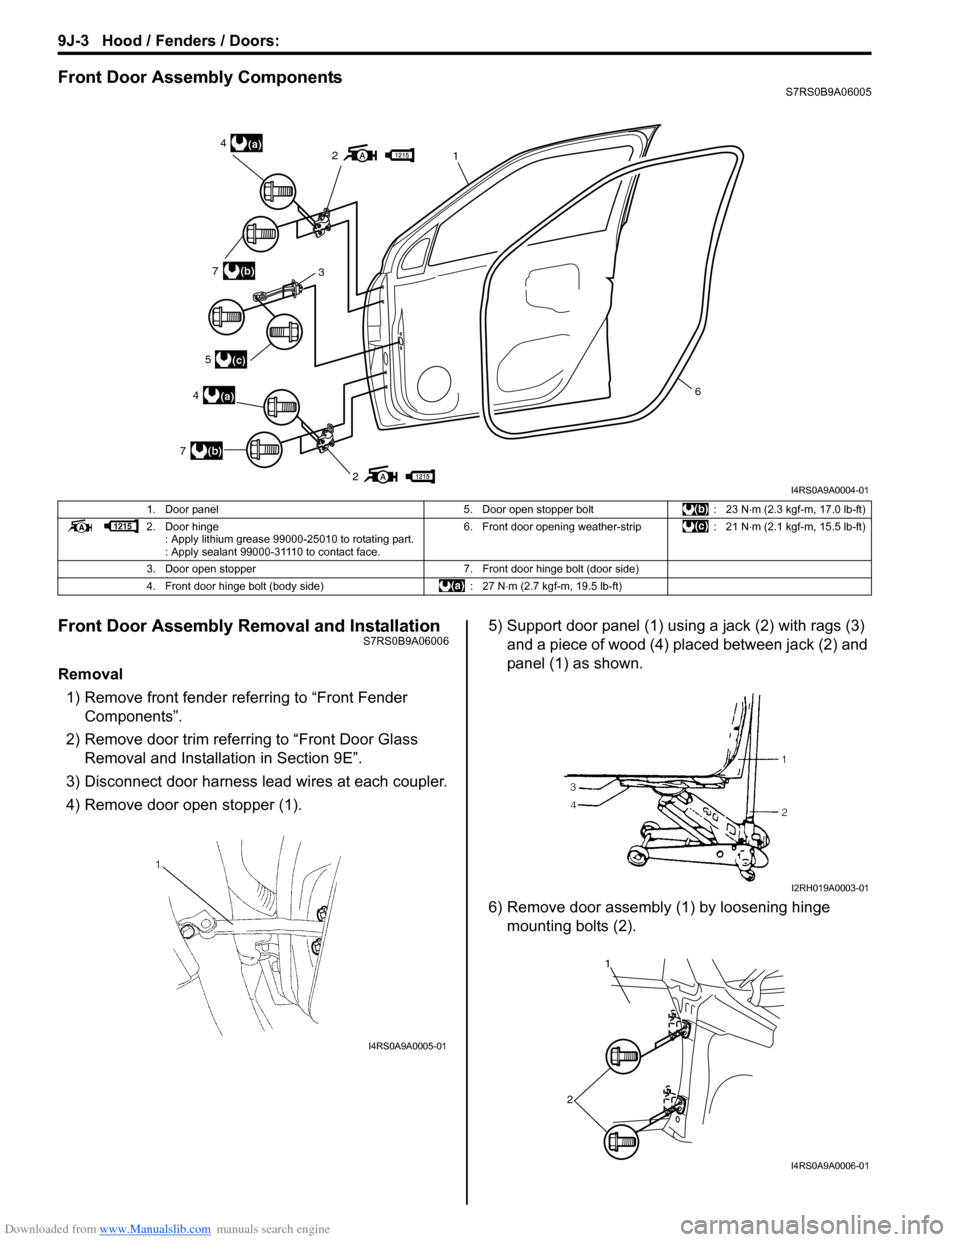 SUZUKI SWIFT 2006 2.G Service Workshop Manual Downloaded from www.Manualslib.com manuals search engine 9J-3 Hood / Fenders / Doors: 
Front Door Assembly ComponentsS7RS0B9A06005
Front Door Assembly Removal and InstallationS7RS0B9A06006
Removal1) R